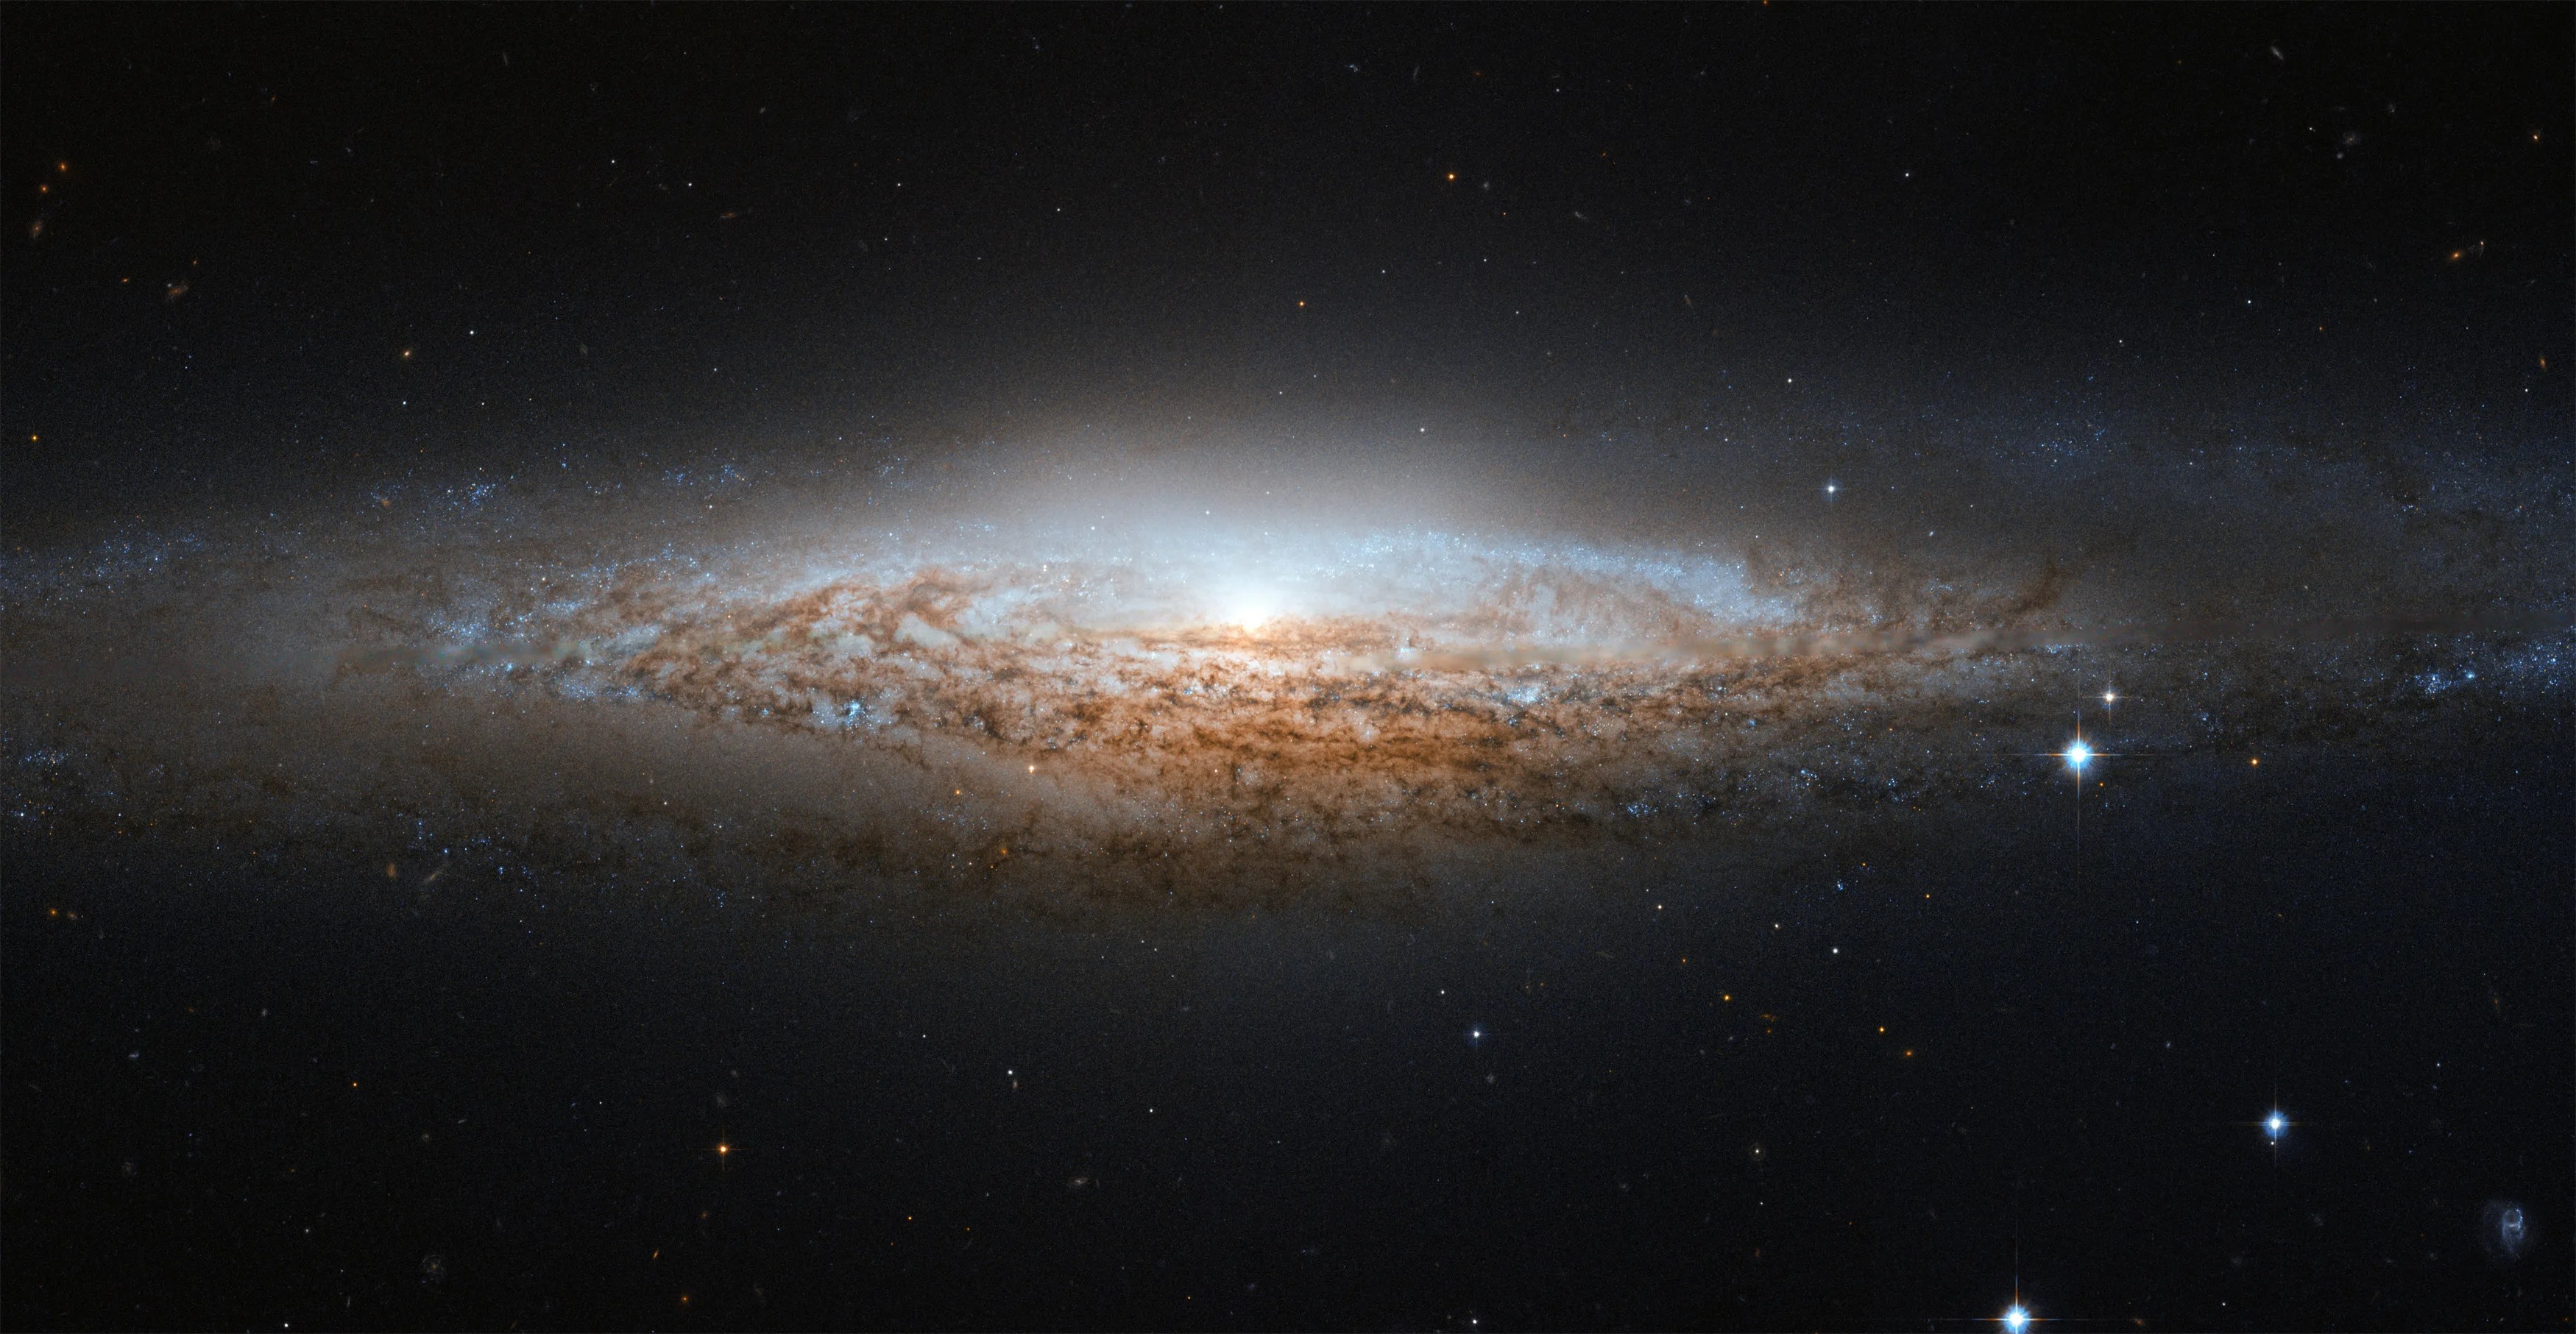 Hubble spies a spiral galaxy edge-on